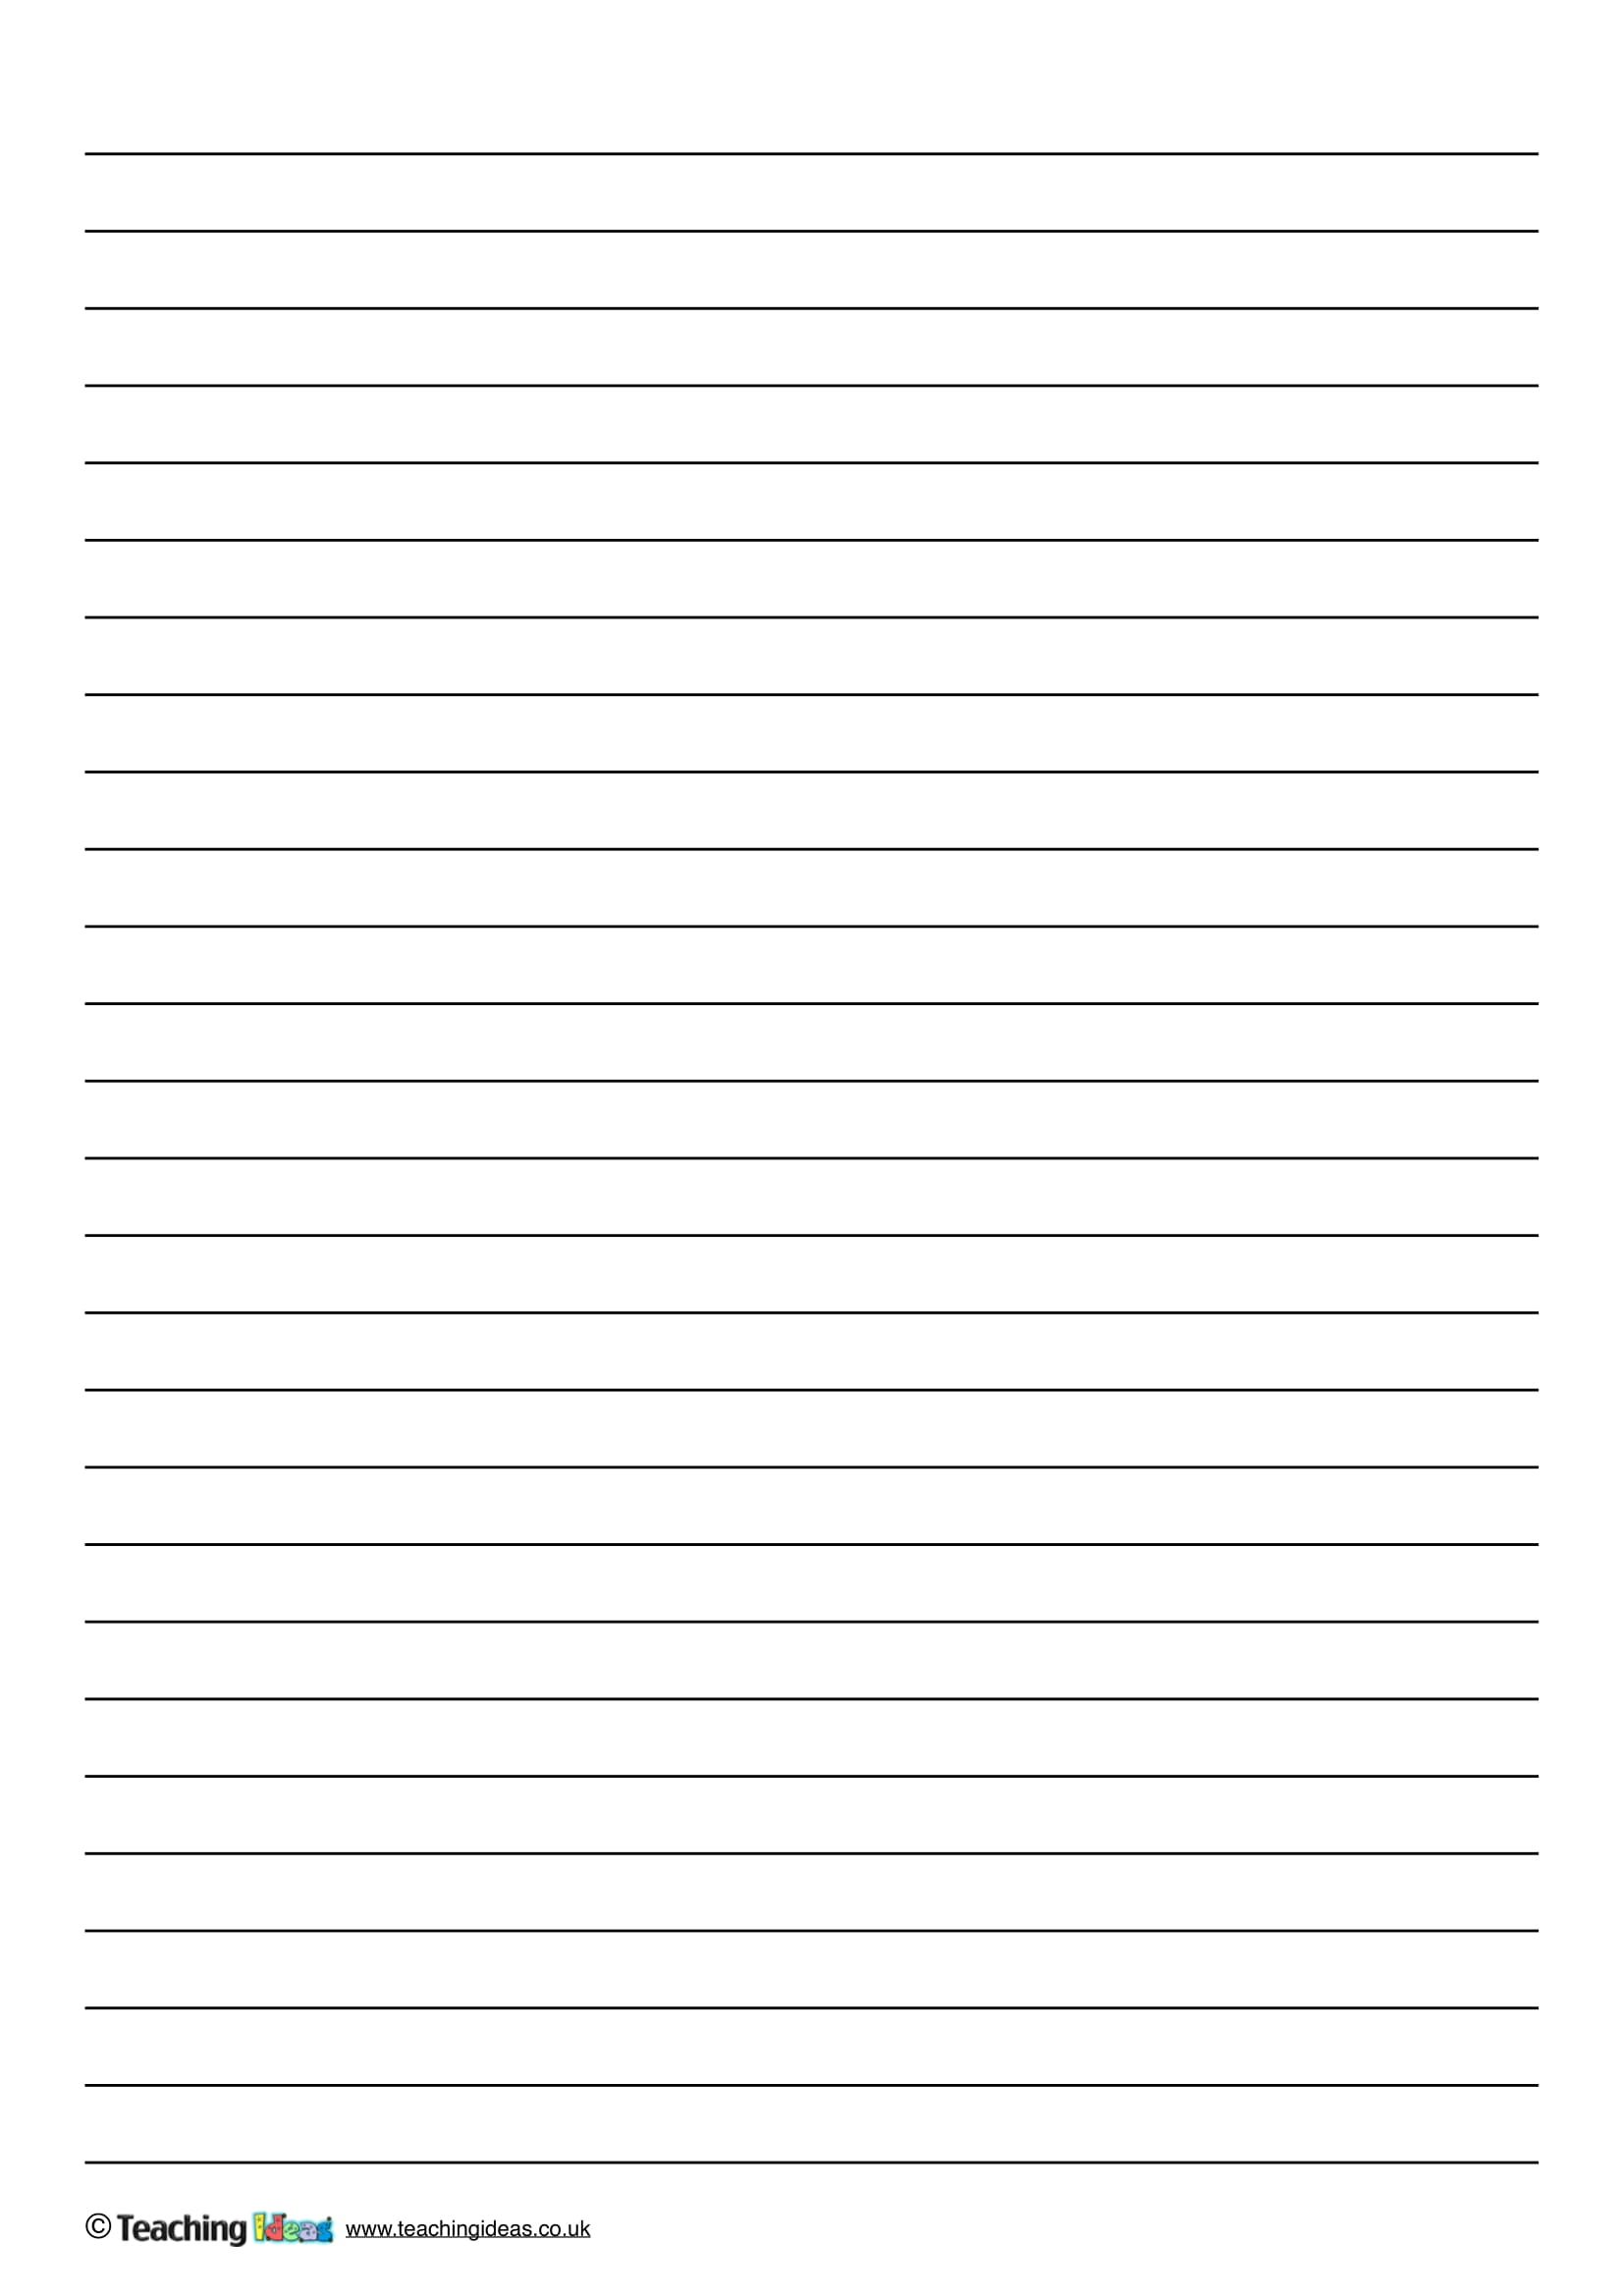 11+ Lined Paper Templates - Pdf | Free & Premium Templates With Ruled Paper Template Word